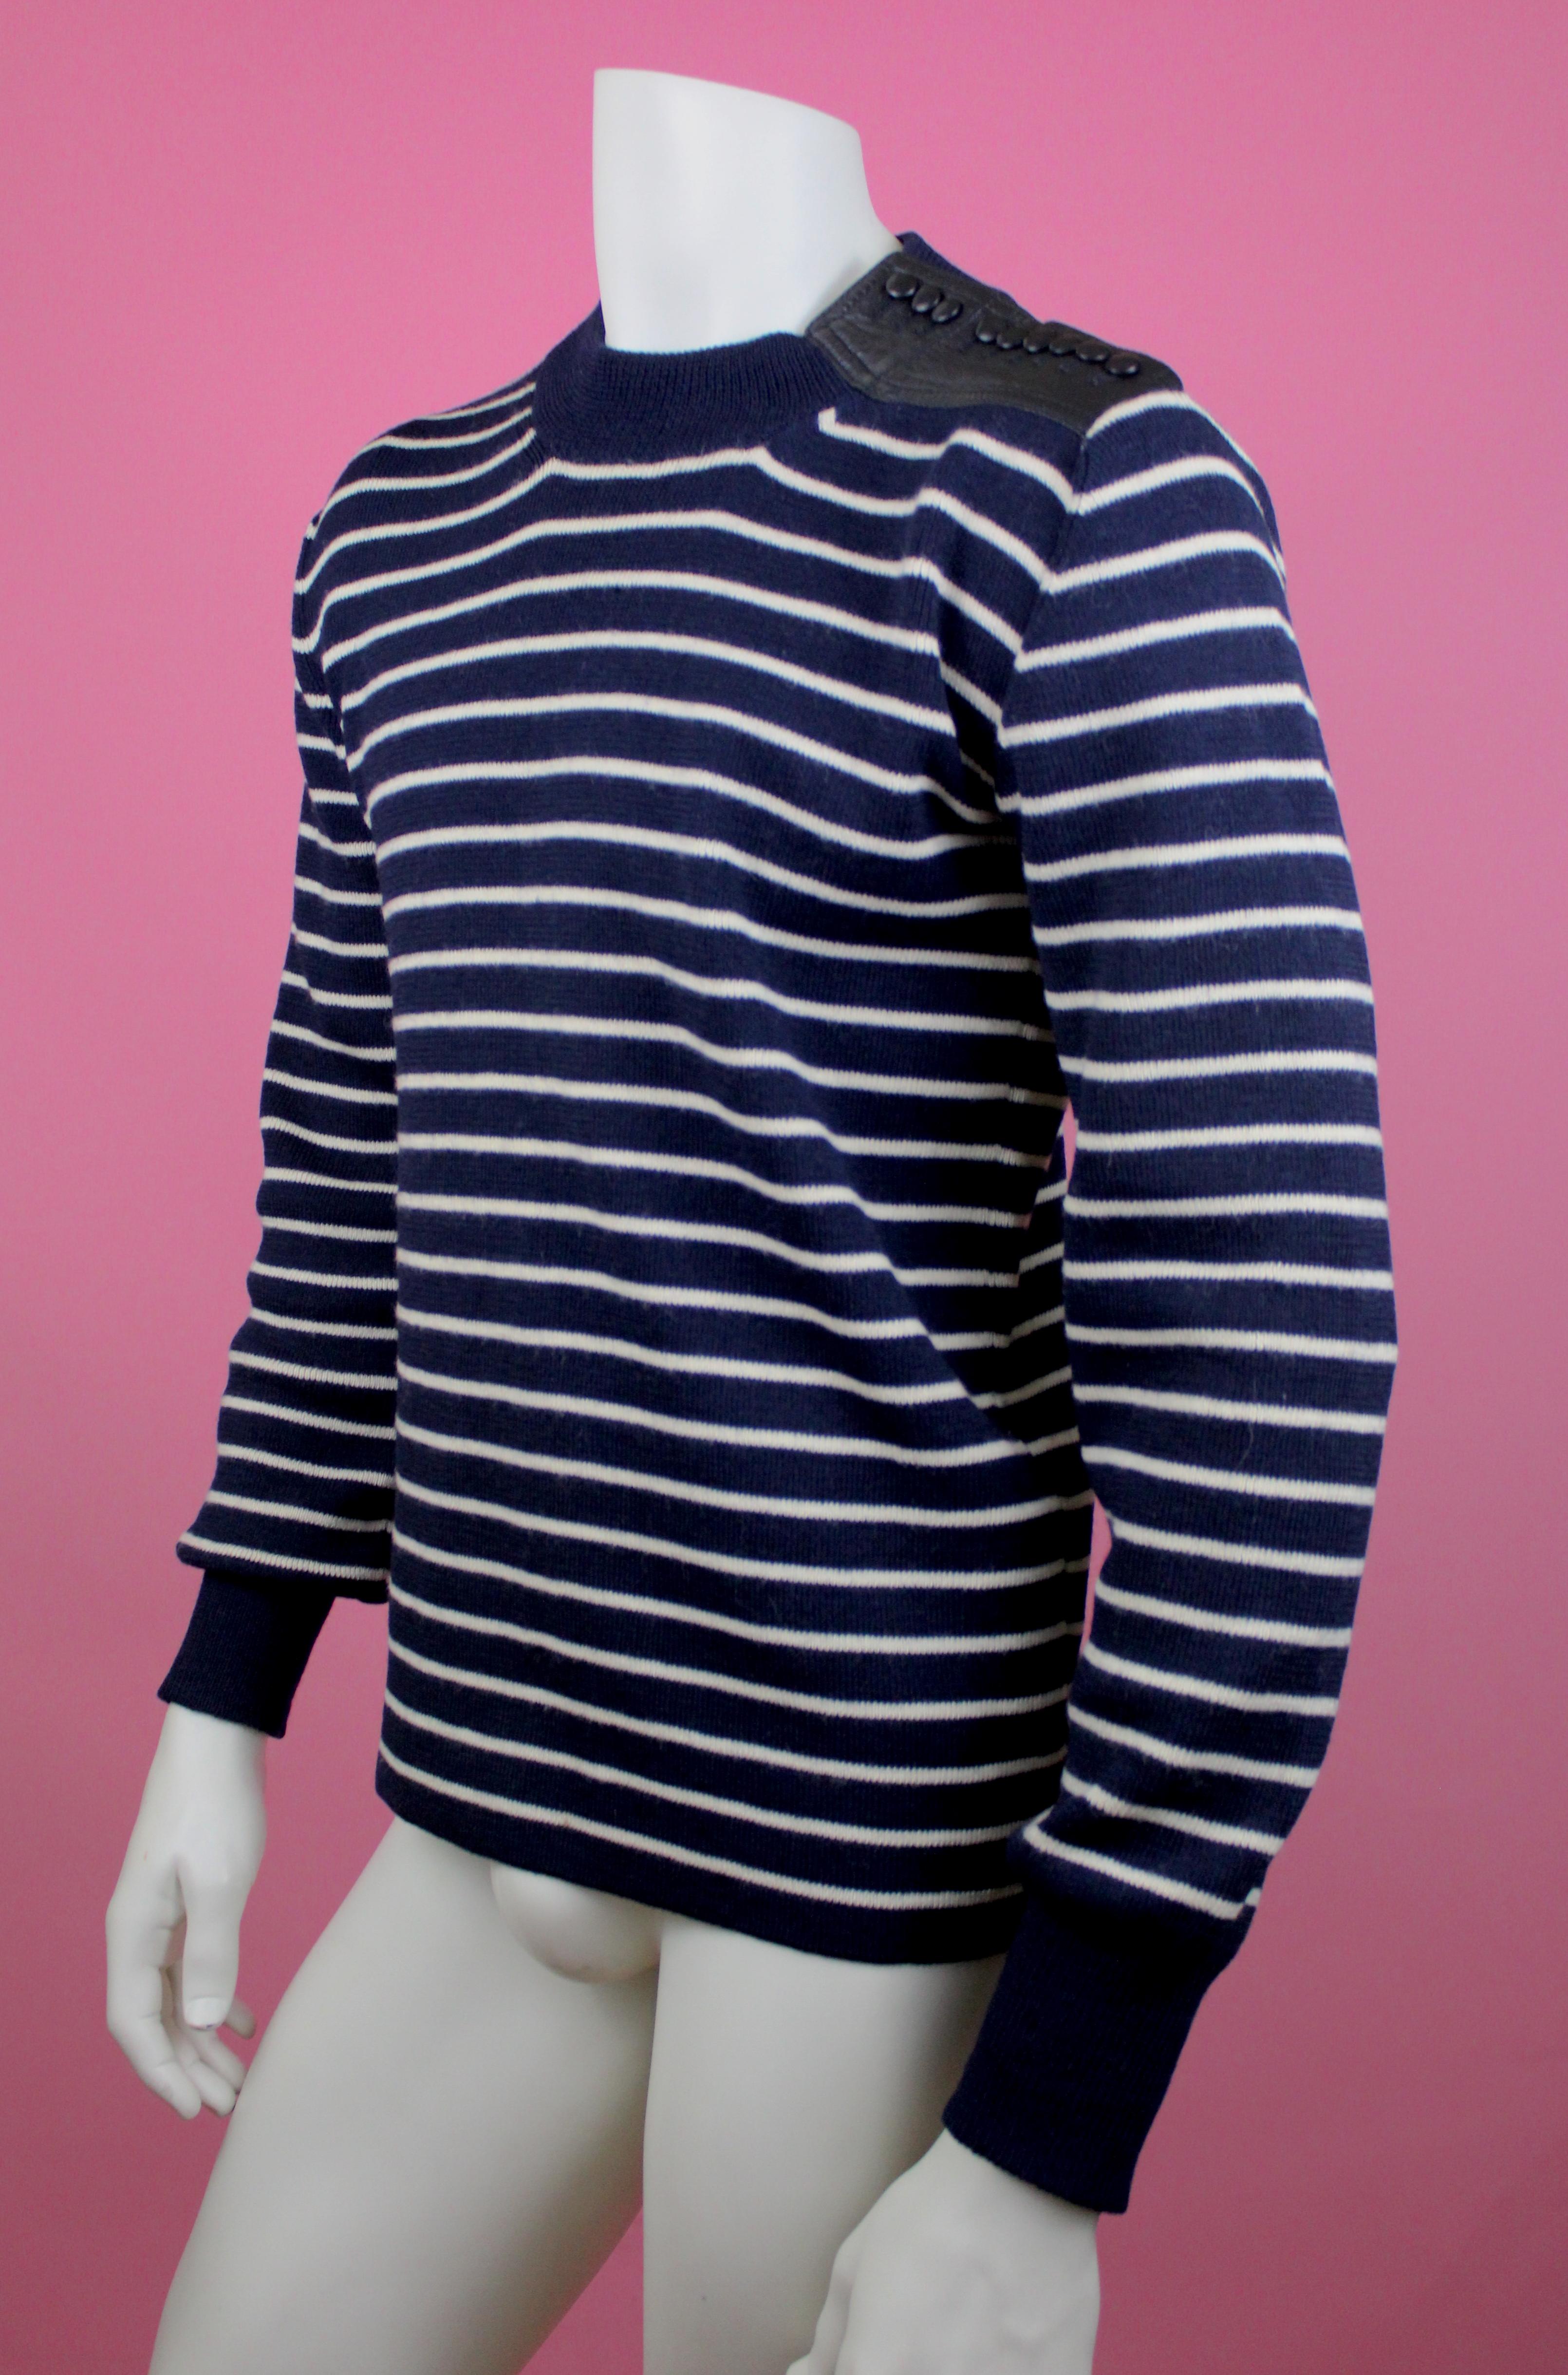 Dior Homme by Hedi Slimane Striped Sweater with Leather Buttons, AW06, Size L  In Good Condition For Sale In Los Angeles, CA